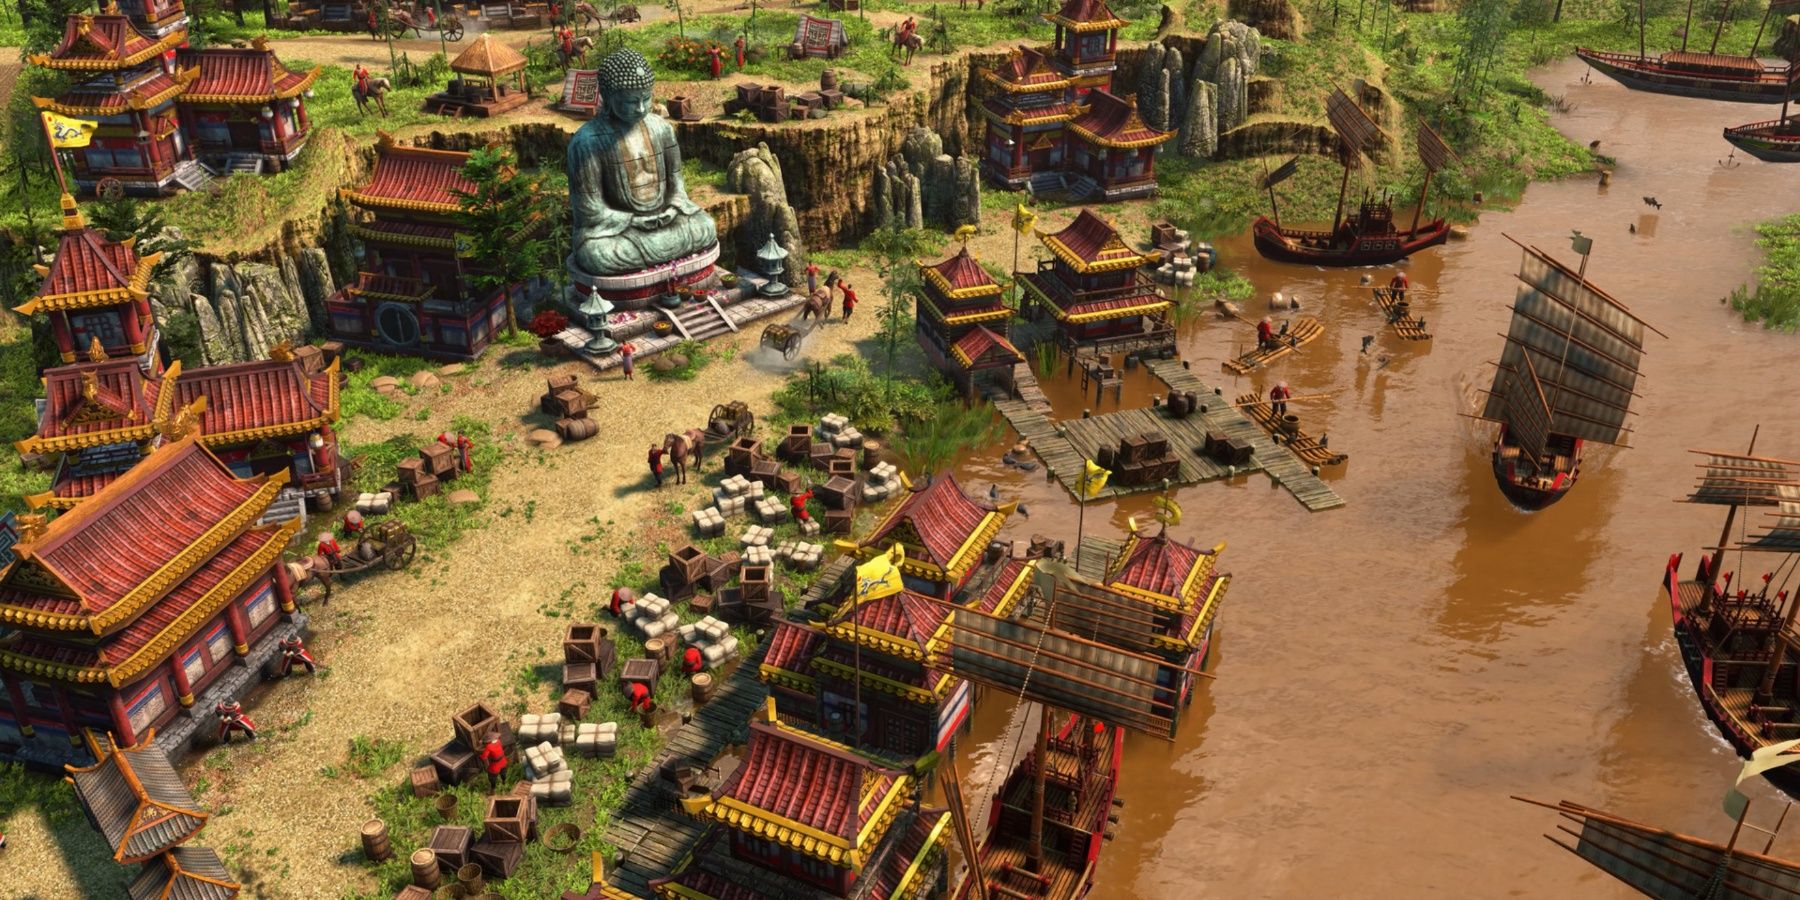 A city from Age of Empires 3